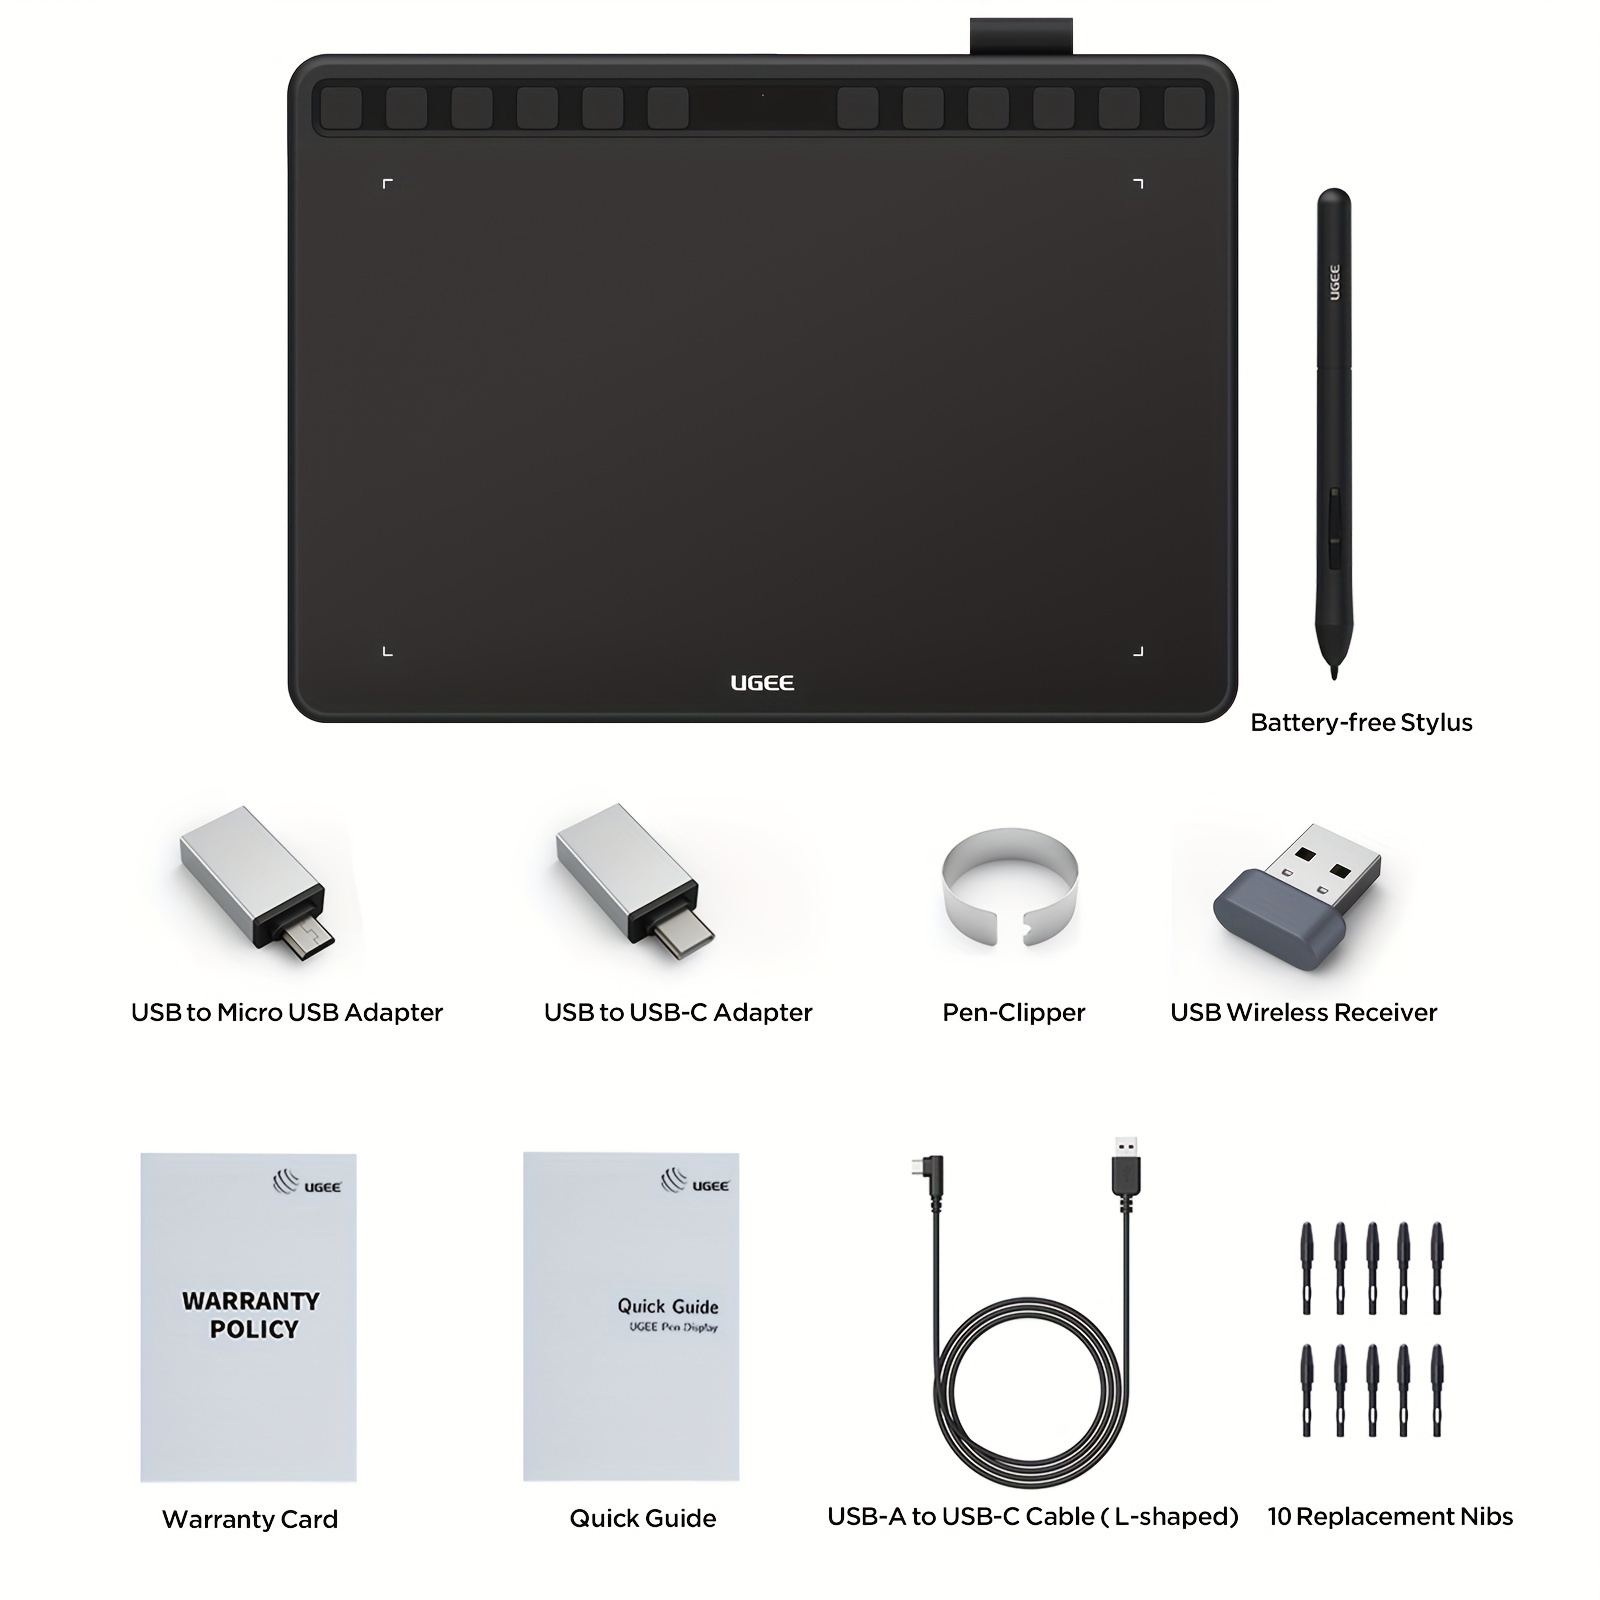 UGEE 10X6.27 Inches Drawing Tablet,Digital Drawing Art Pad with 12 Shortcut  Keys,Battery-Free 8192 Passive StylusComputer Graphic Pen Tablet Work for  Mac, Windows PC and Android 